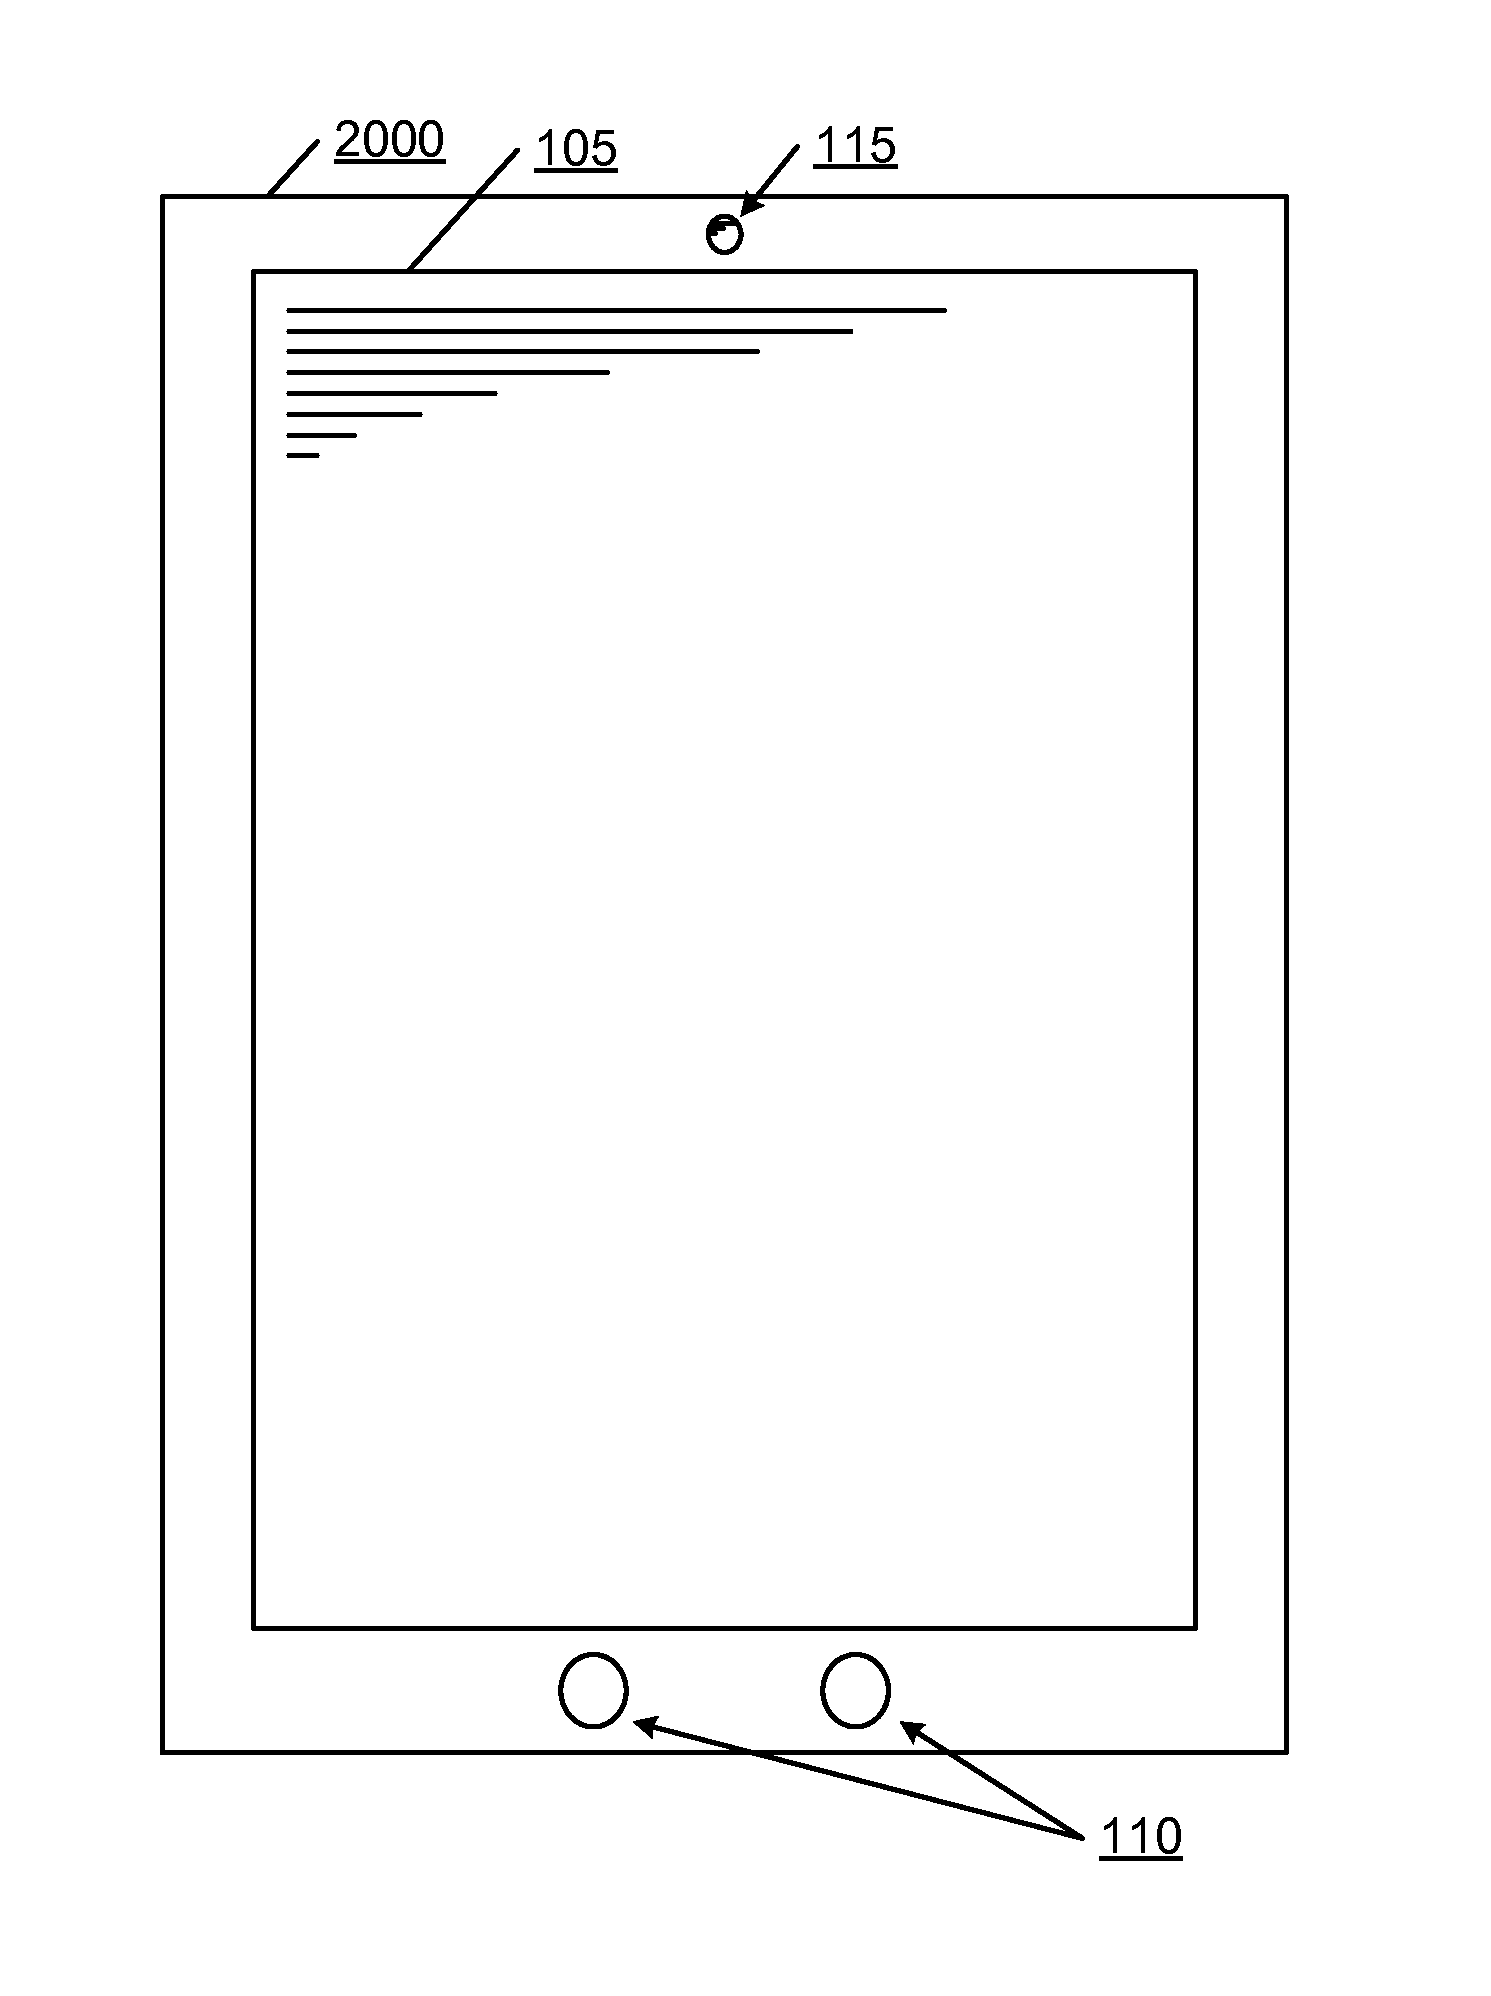 Method for calibration of sensors embedded or wirelessly connected to a mobile device